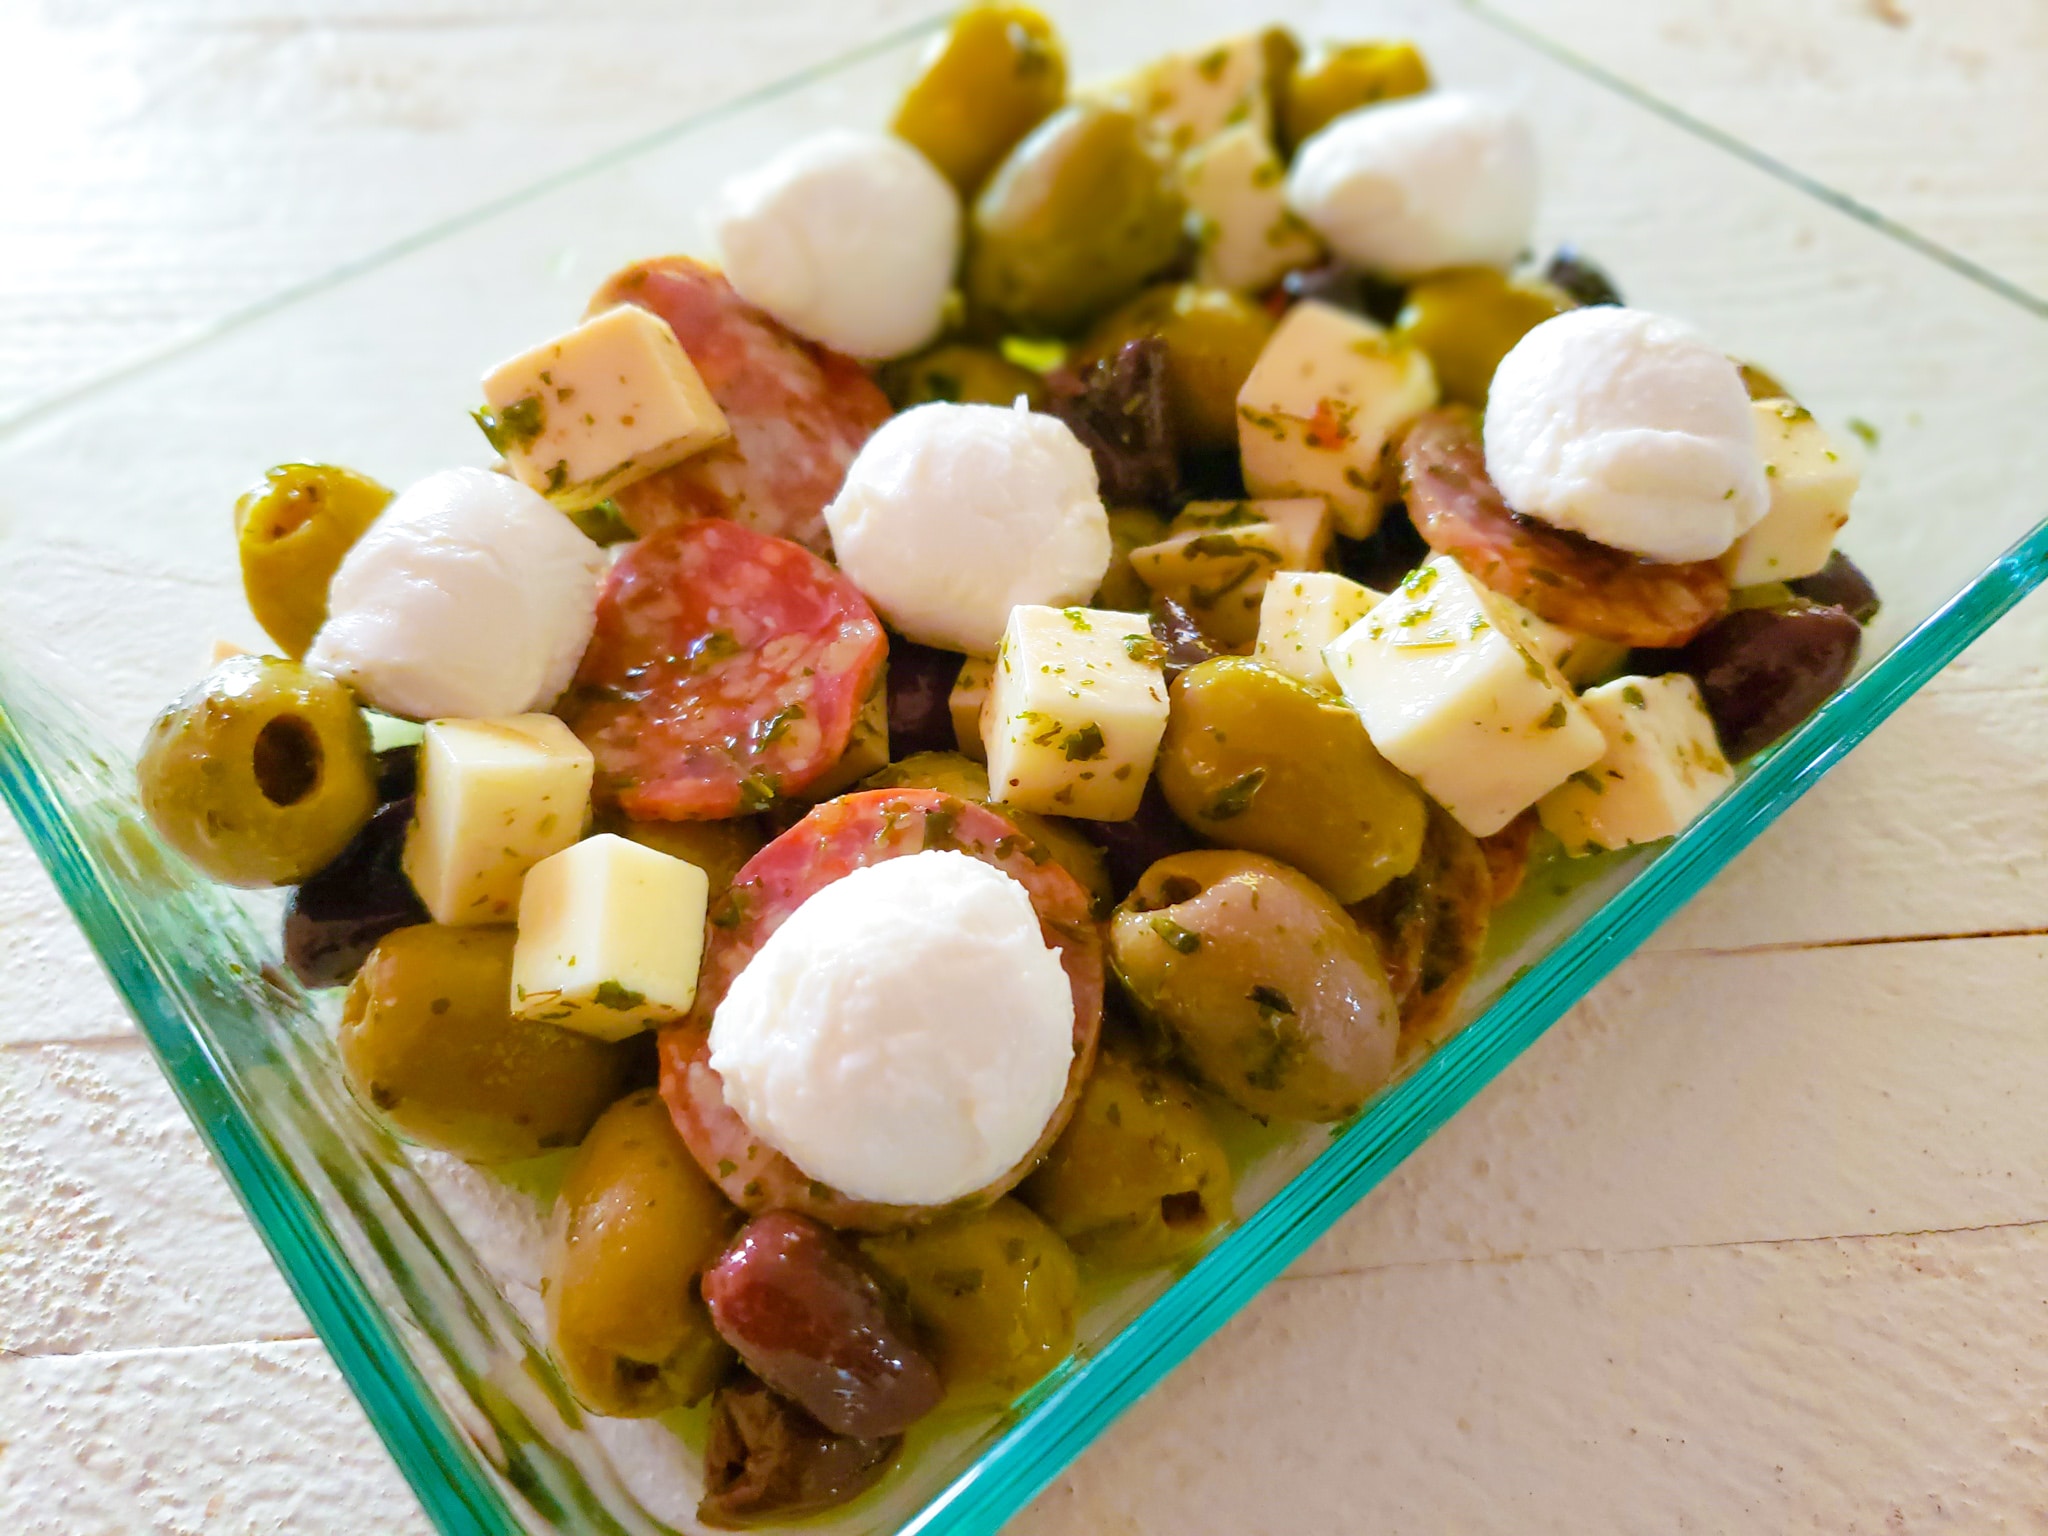 a glass dish with olives, cheese cubes, mozzarella balls and everything has pesto on it